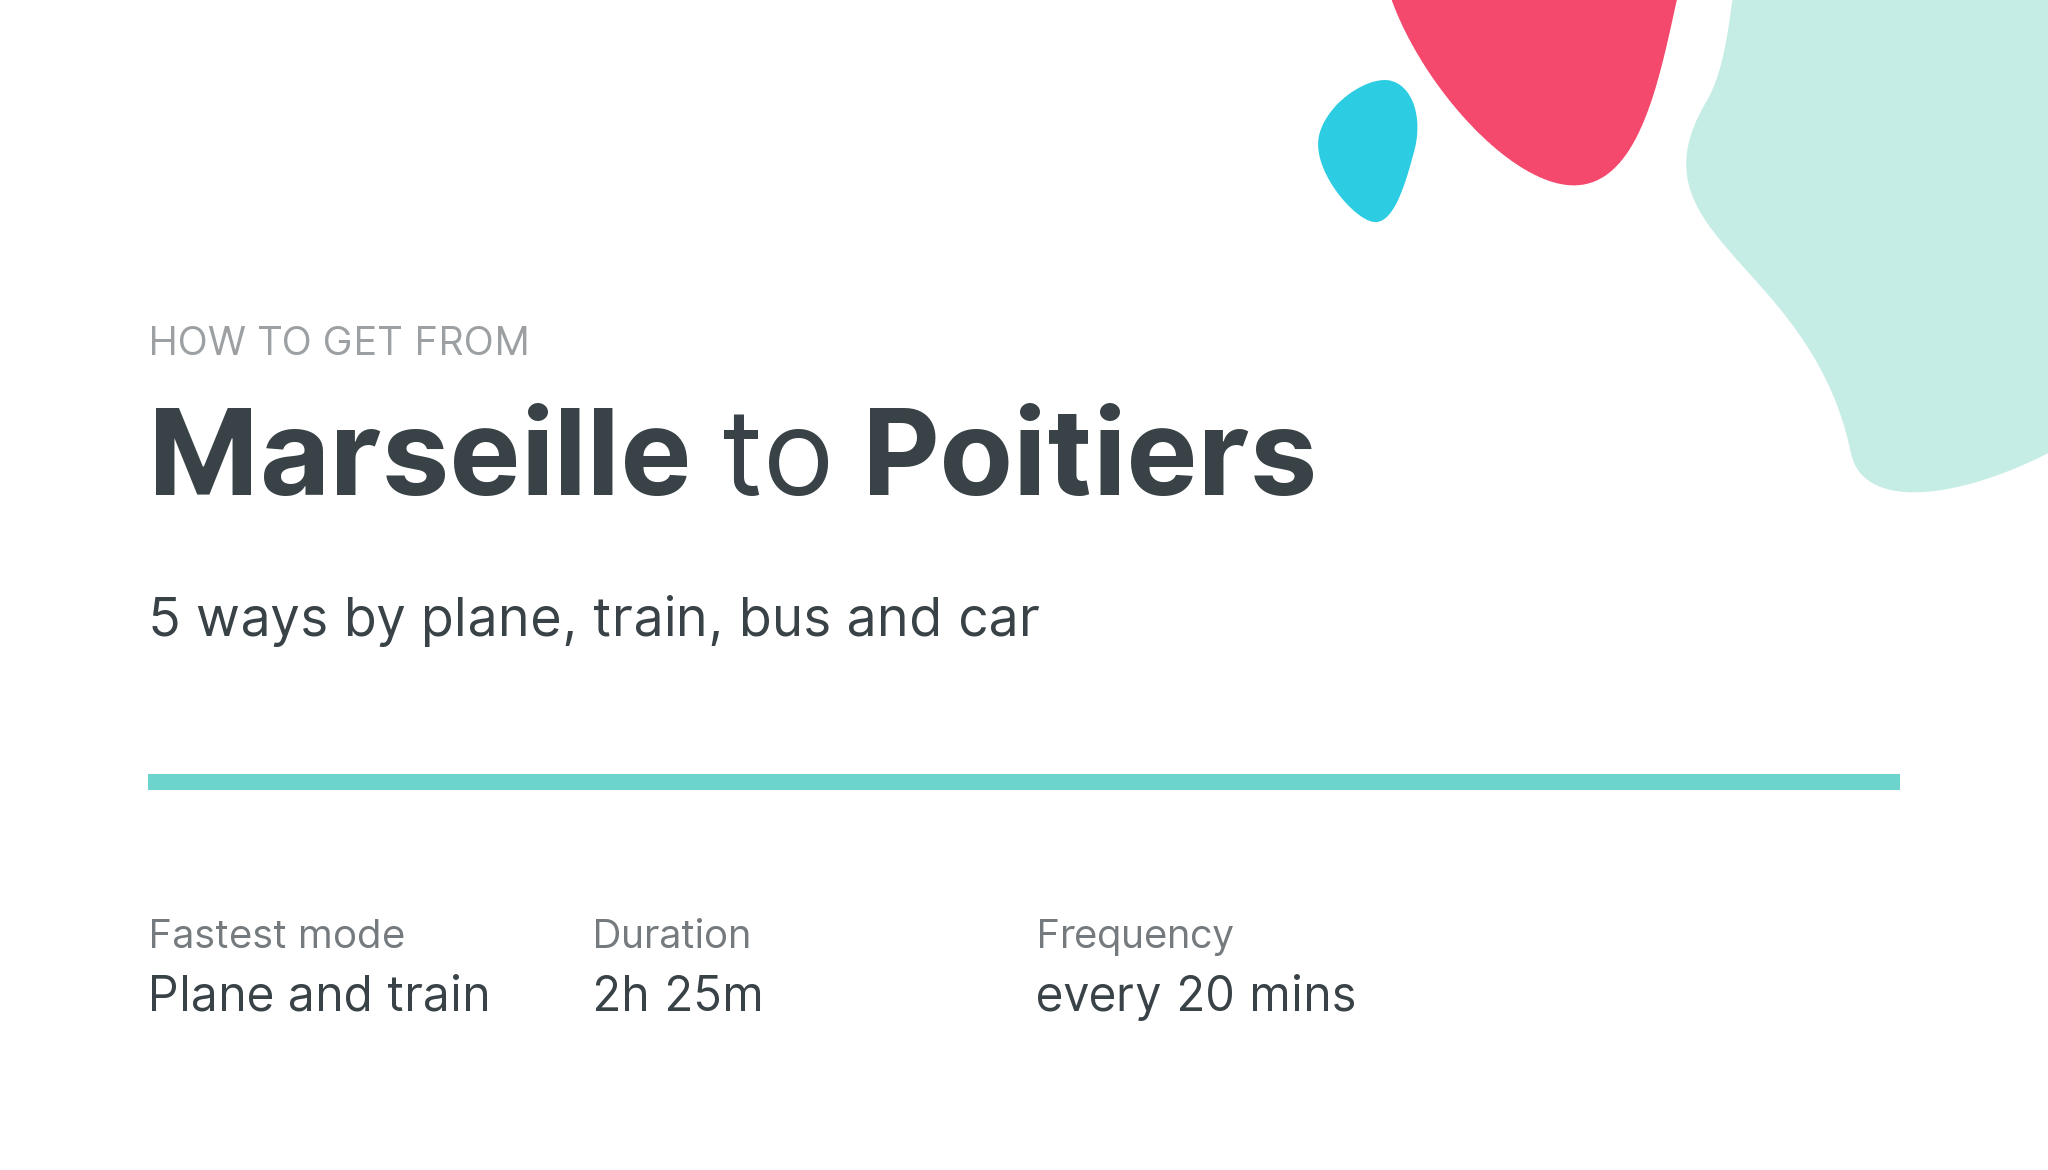 How do I get from Marseille to Poitiers